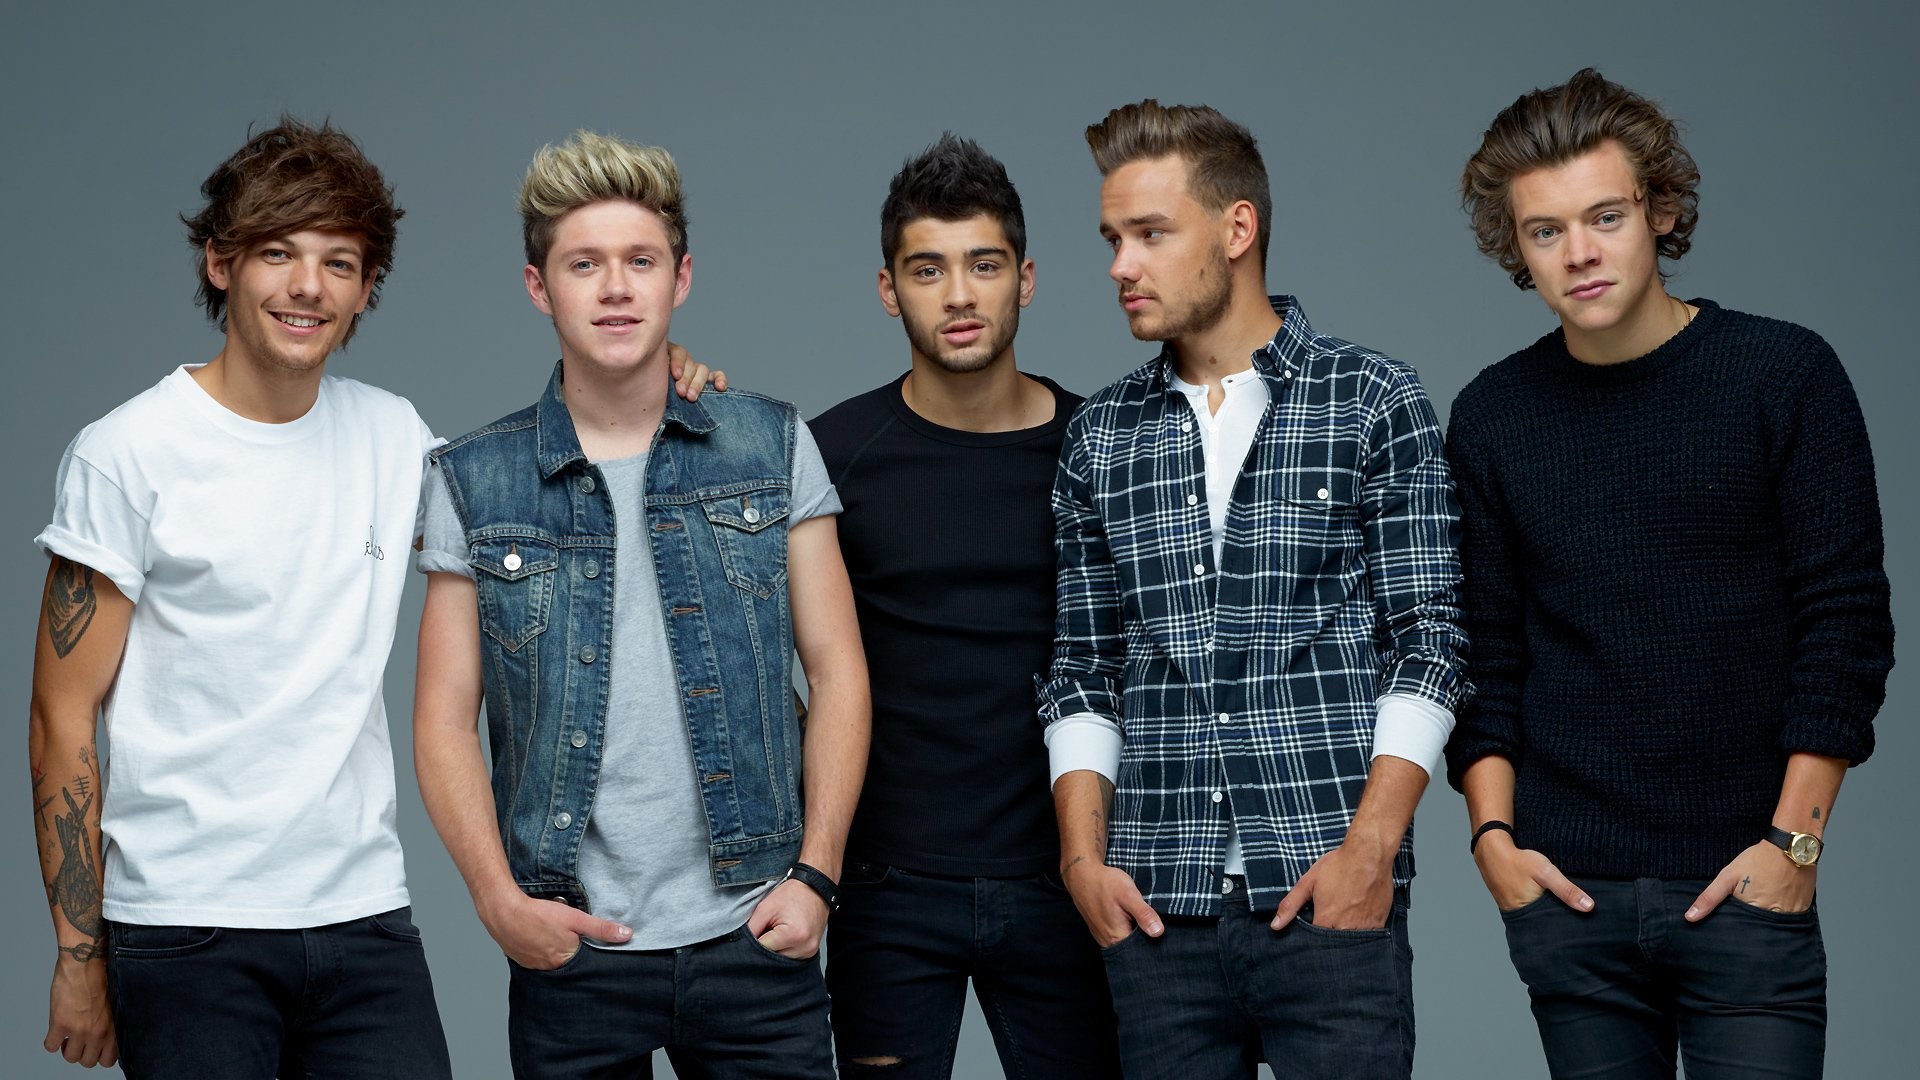 1920x1080 Music - One Direction Wallpaper